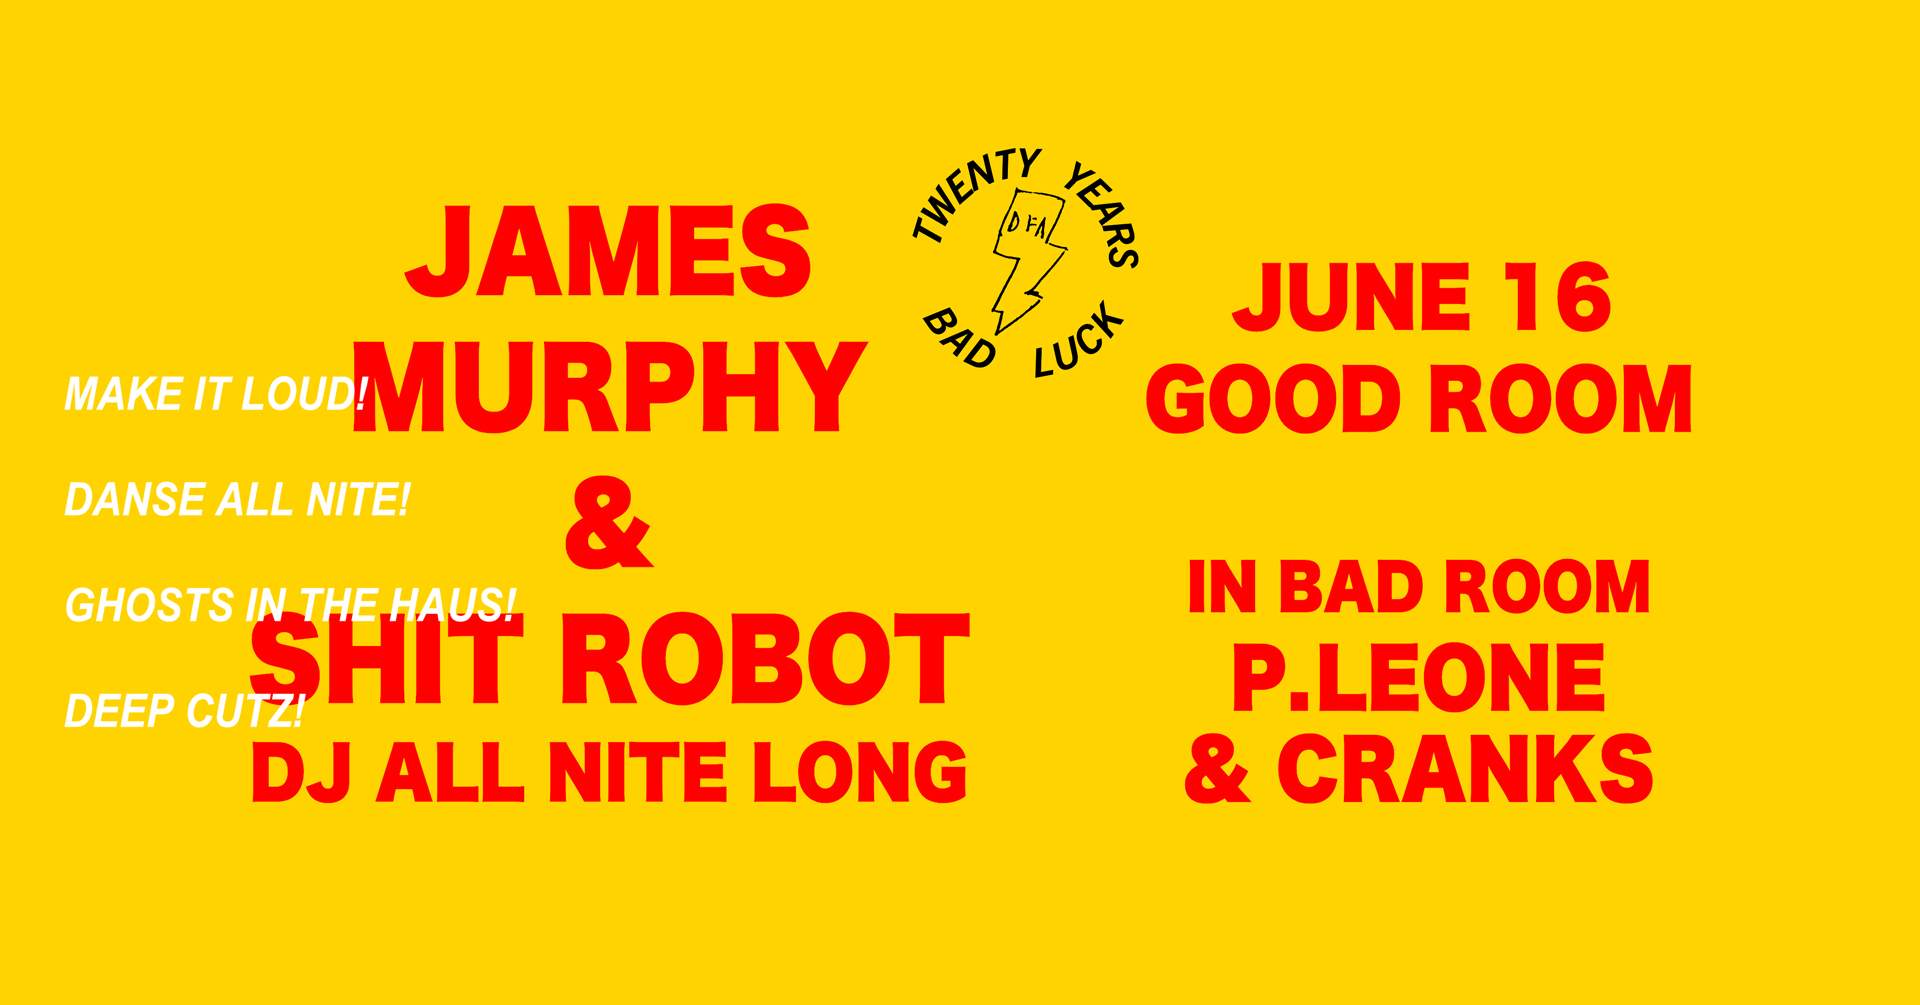 [SOLD OUT!] James Murphy and Shit Robot ALL NITE LONG - Página frontal